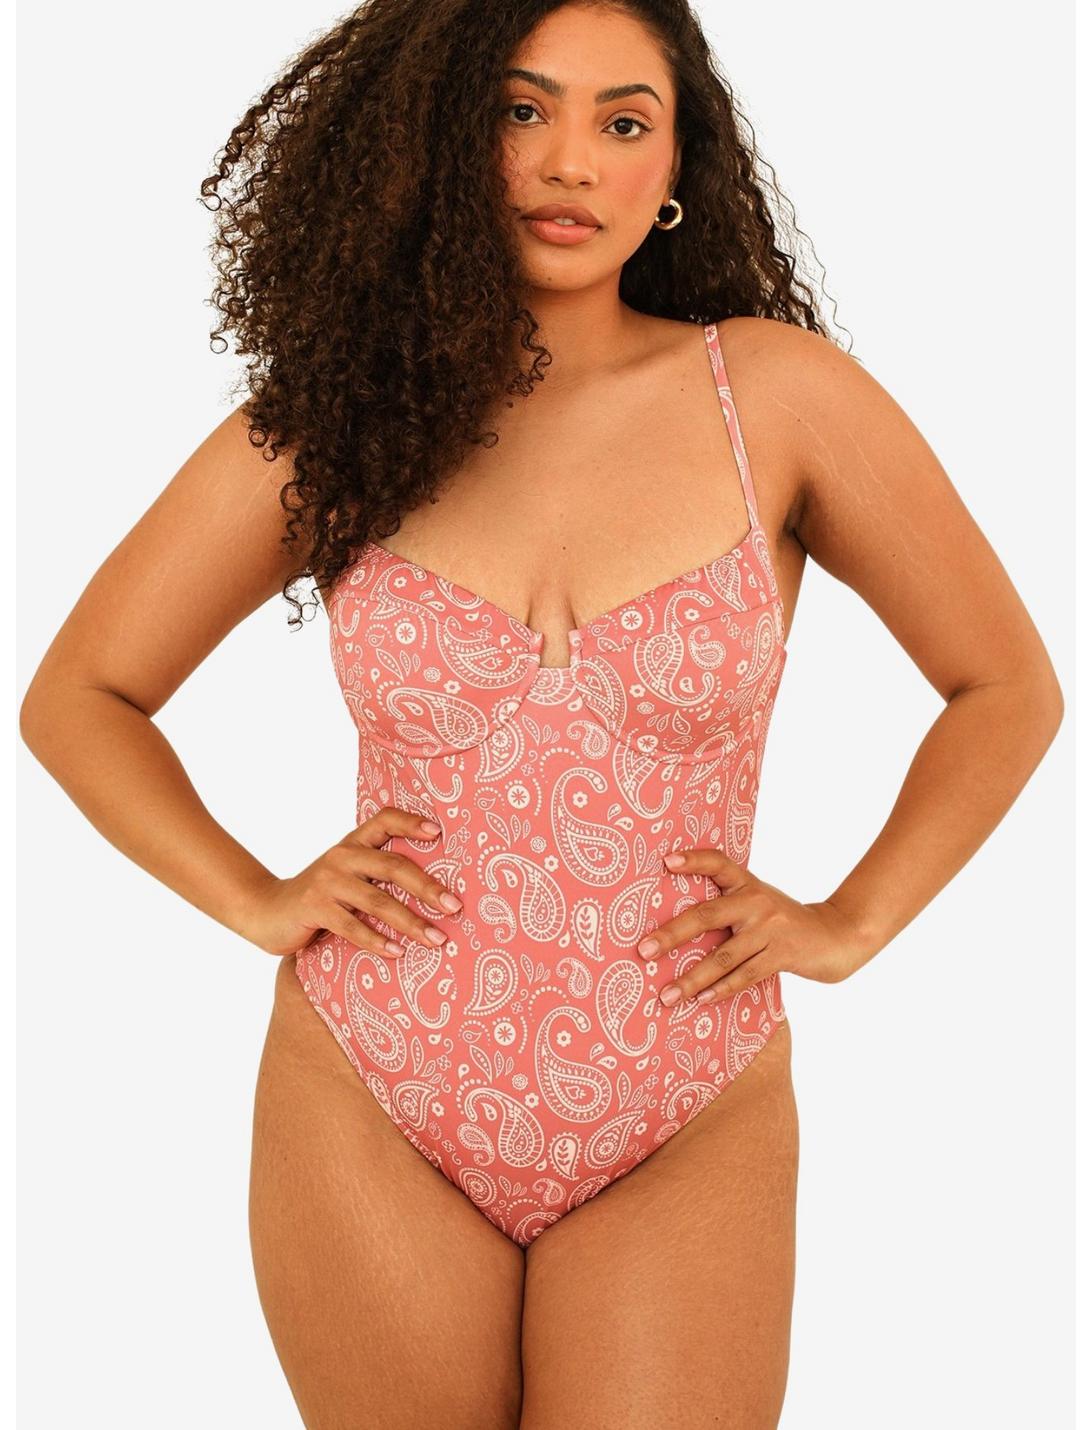 Dippin' Daisy's Saltwater Thigh High Cut Swim One Piece Pink Paisley, PAISLEY, hi-res